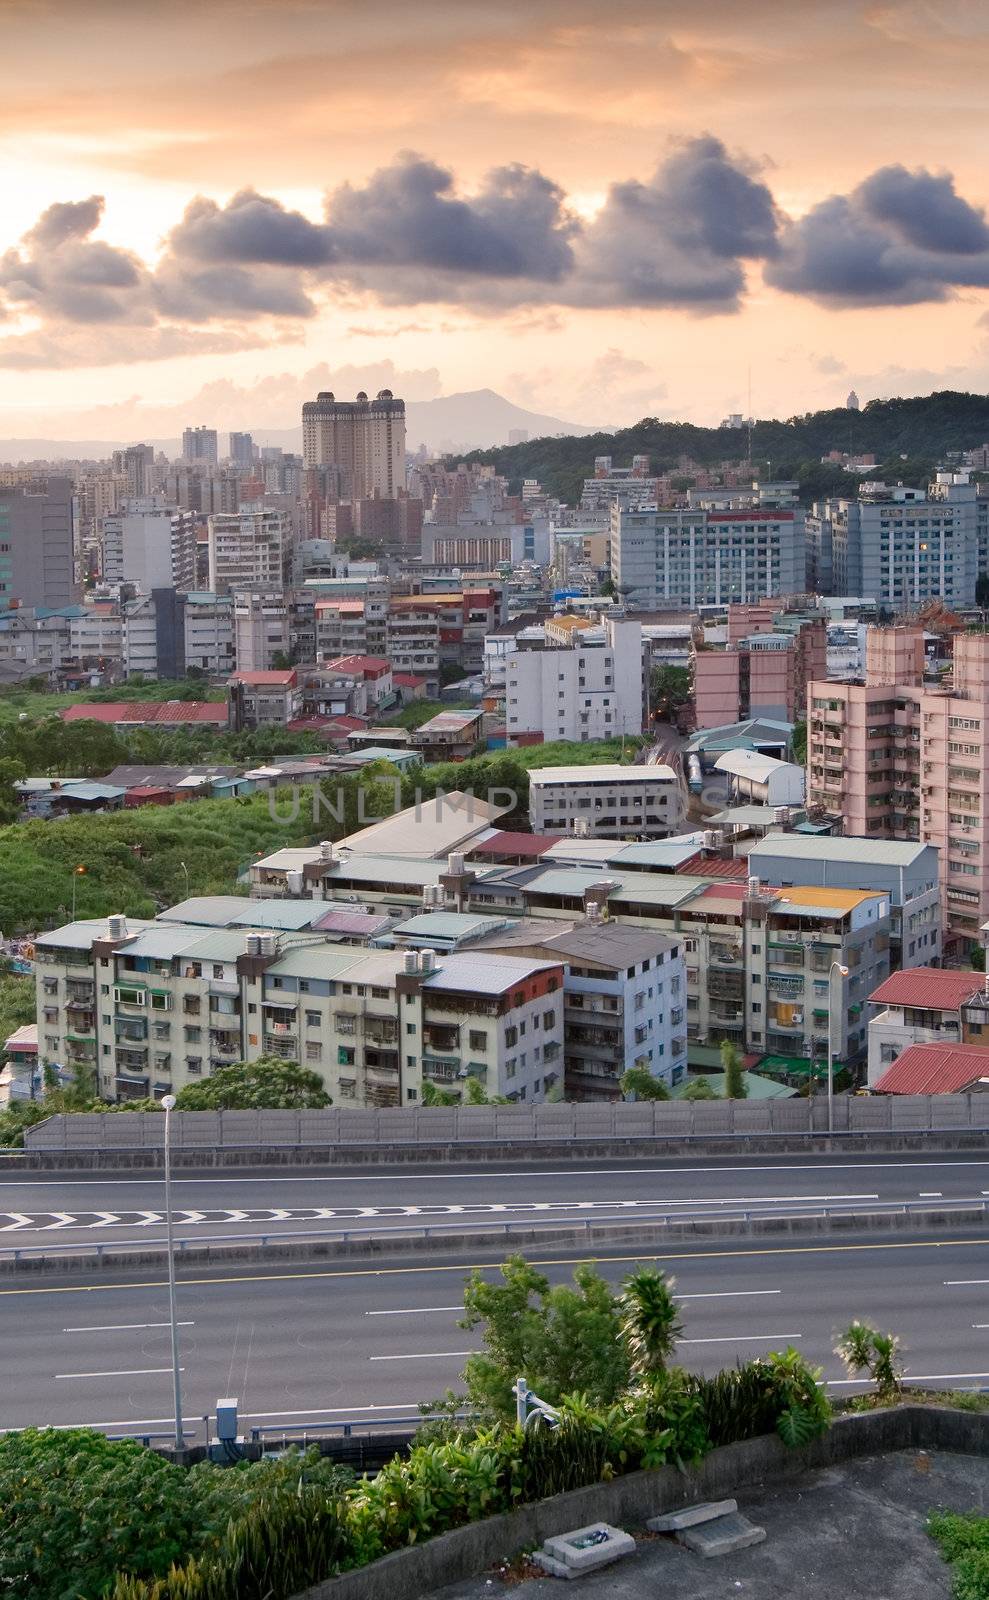 It is a cityscape photo of apartments and highway.